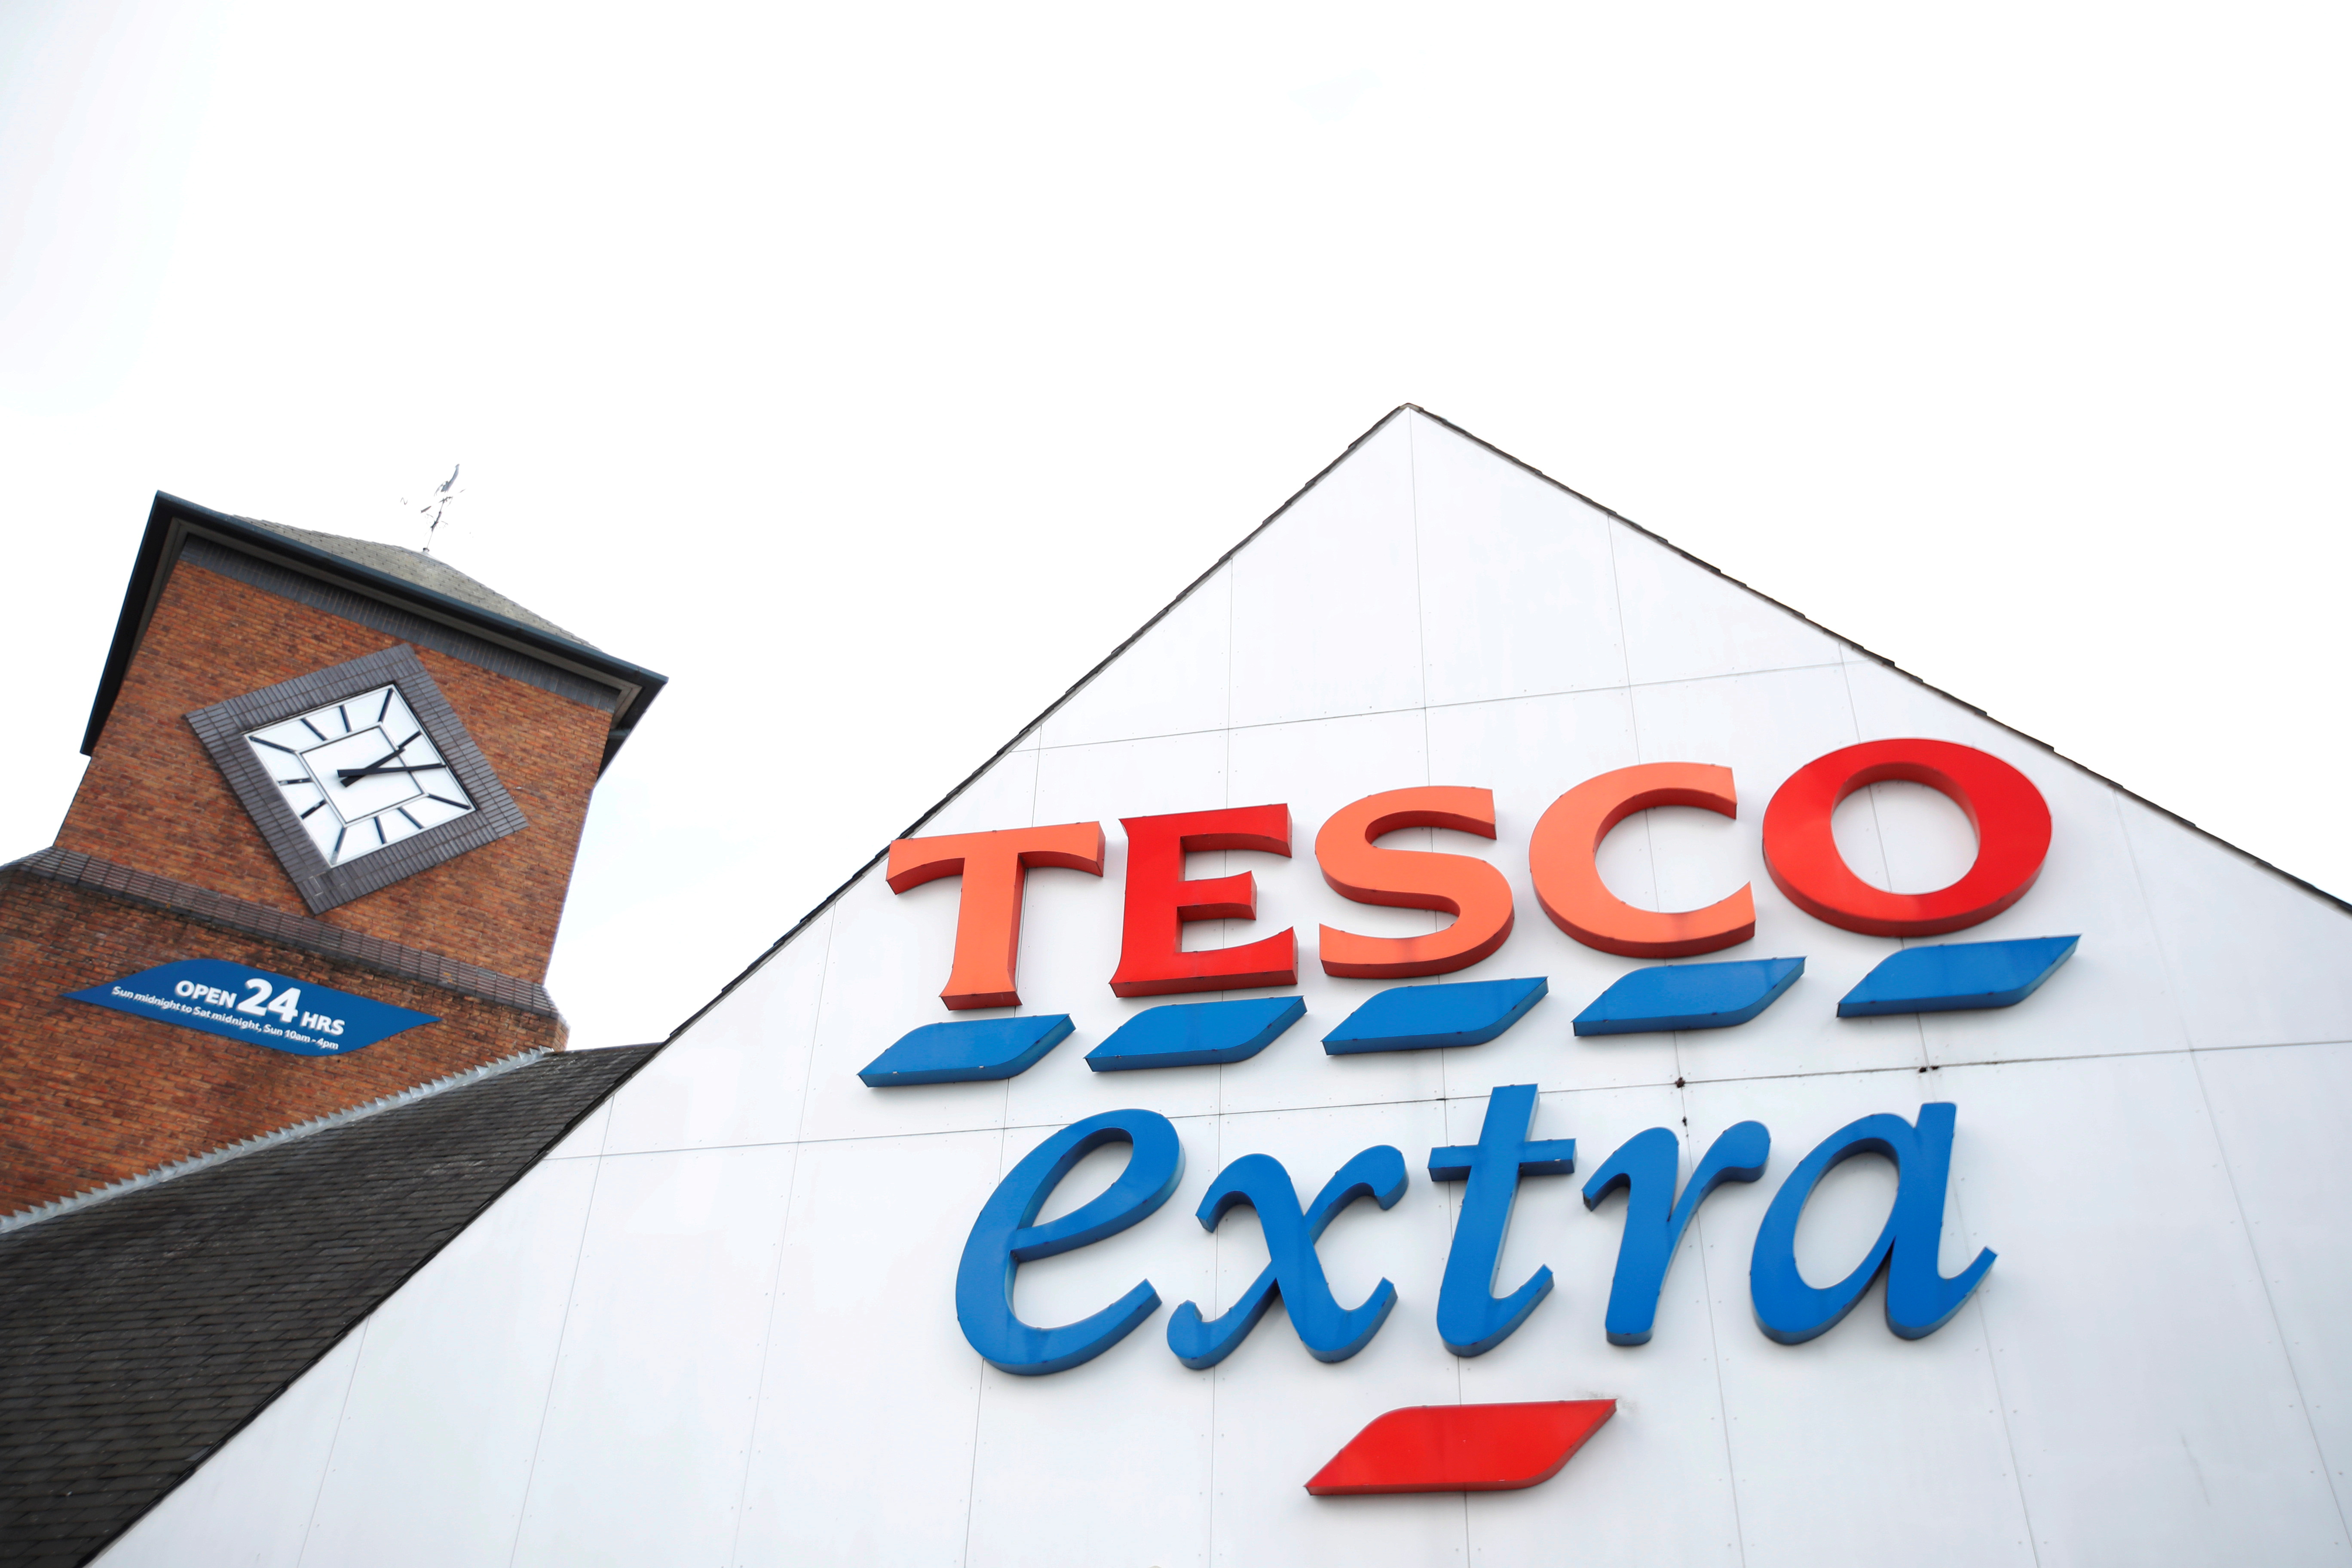 Britain's Tesco concedes to activist shareholders on health